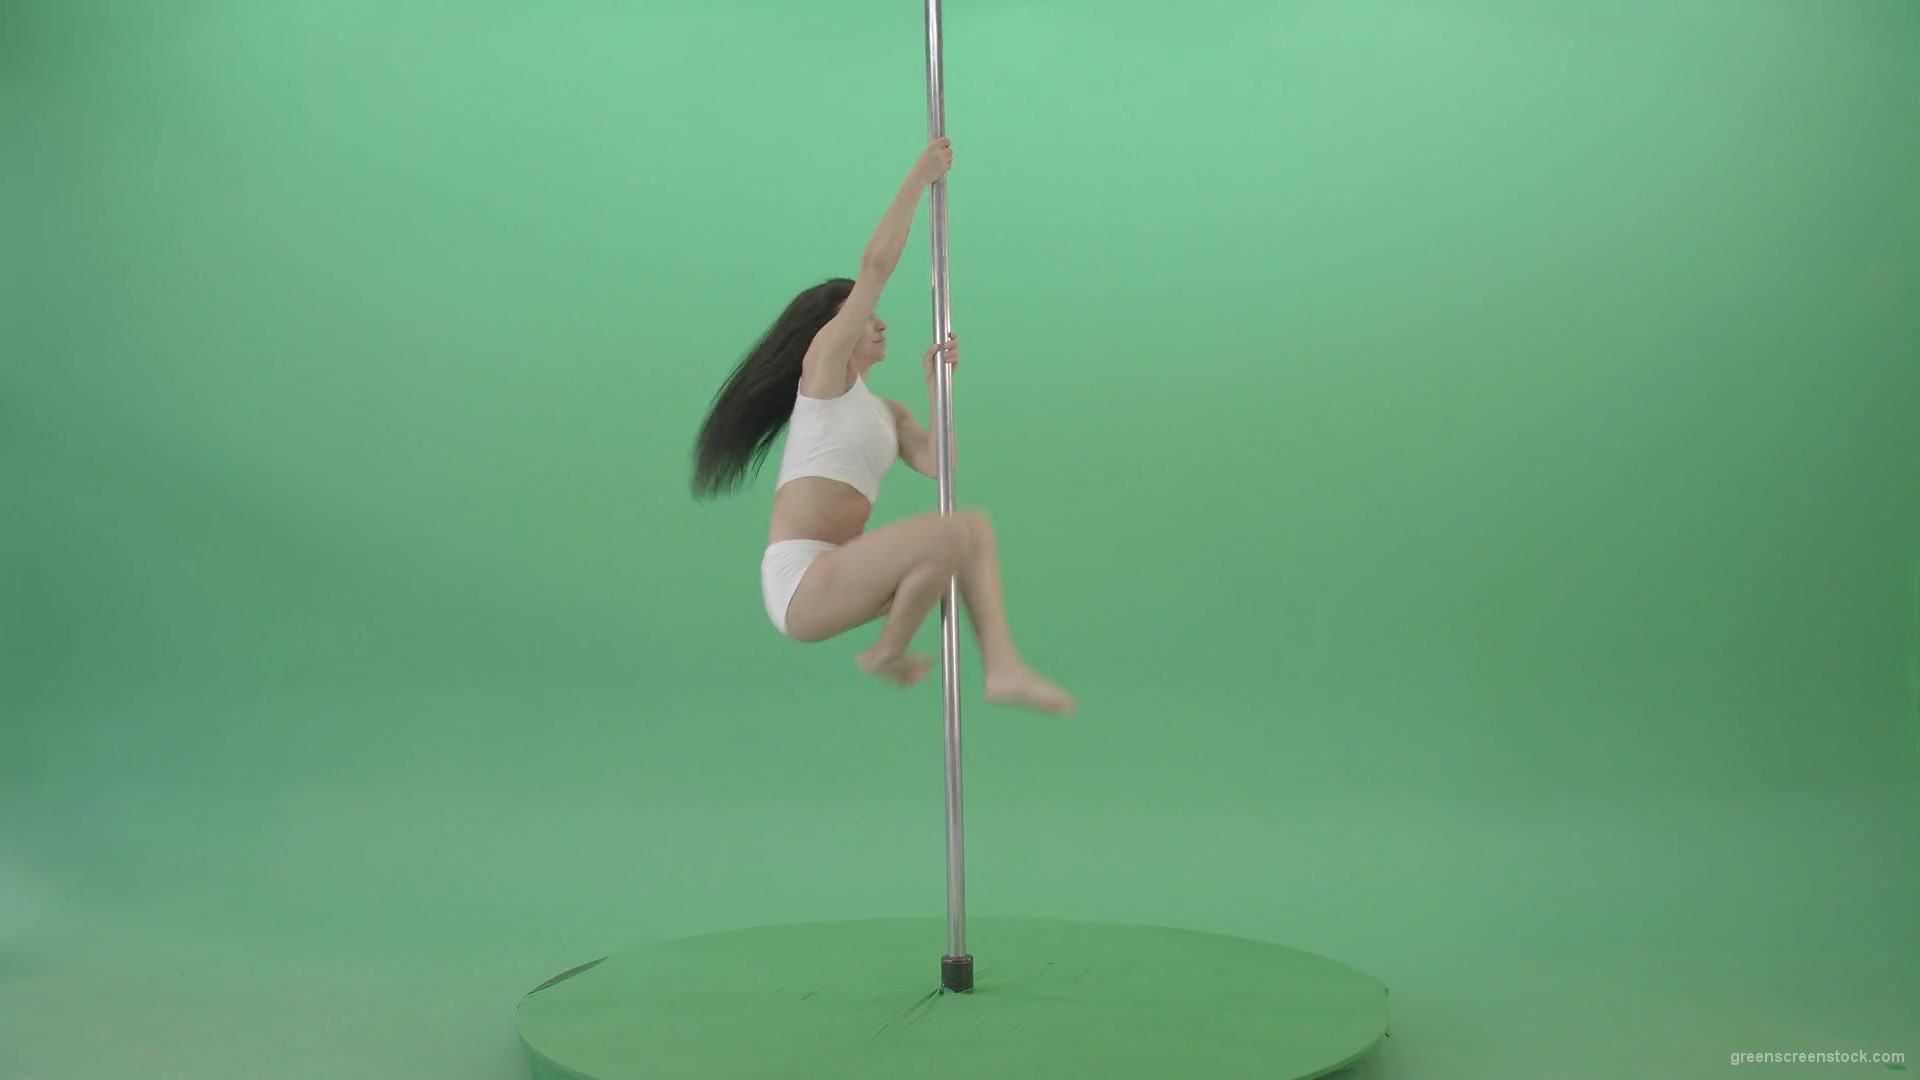 vj video background Sport-Fit-Girl-spinning-on-pole-making-acrobatic-element-on-green-screen-1920_003